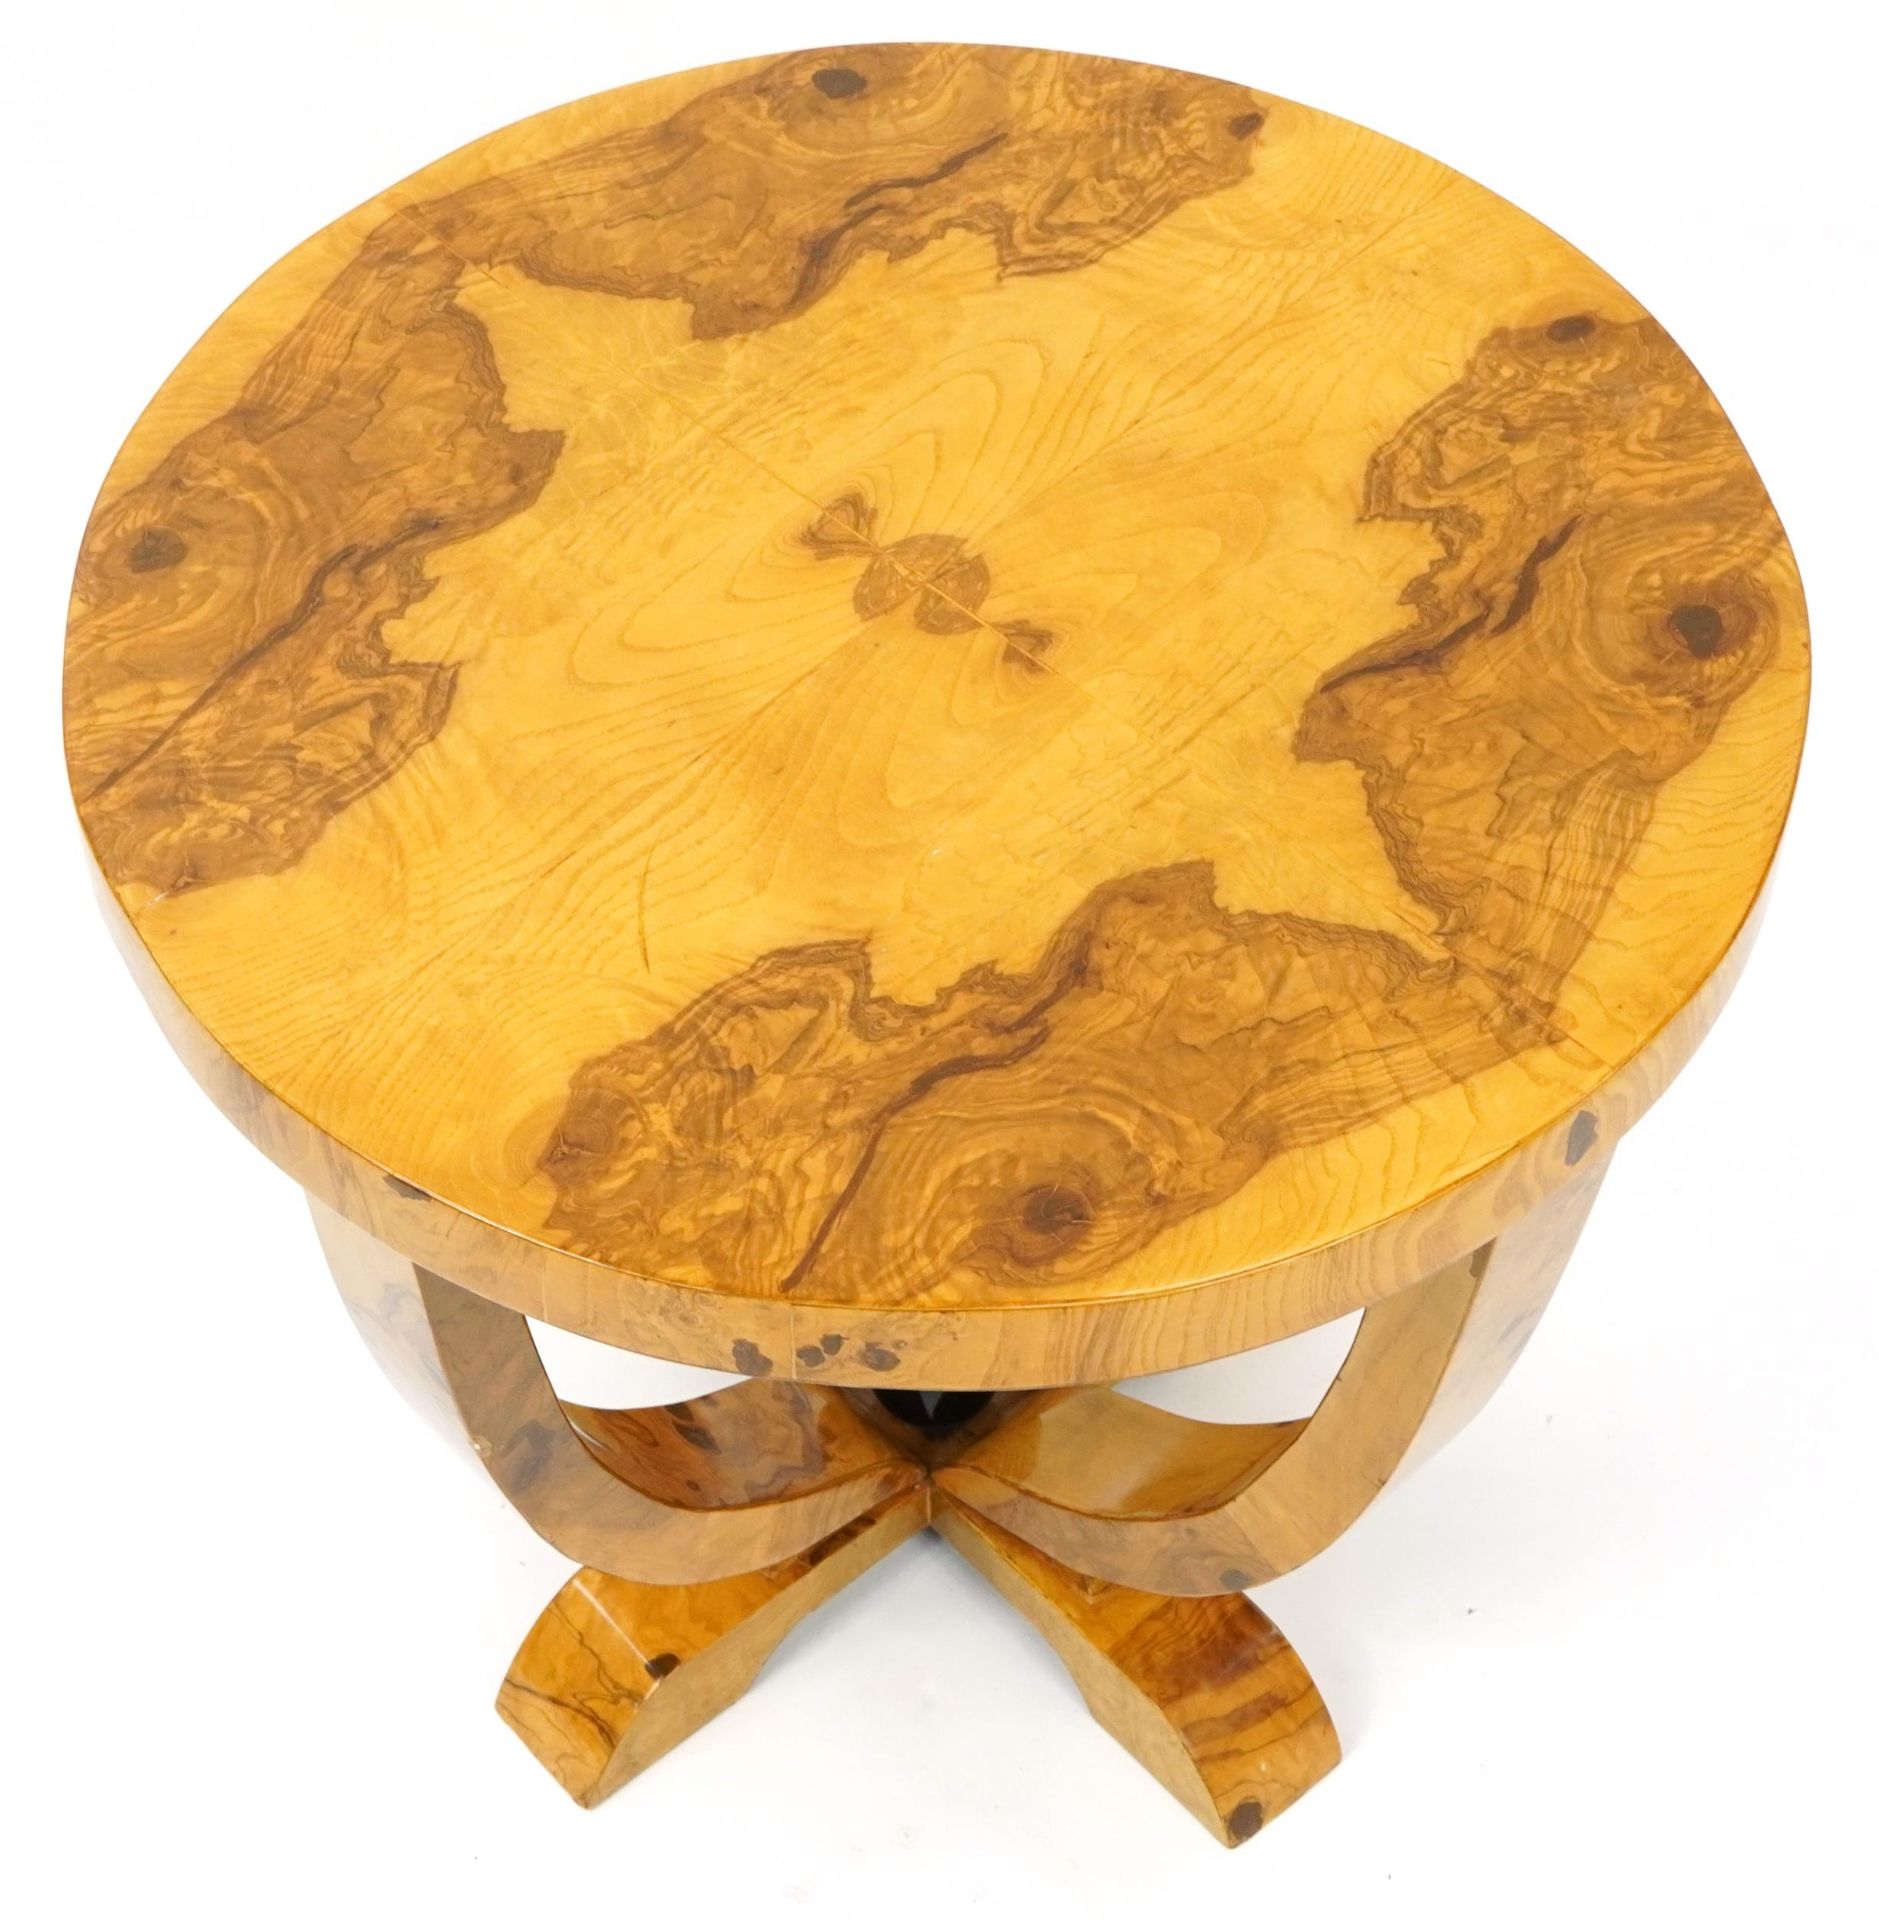 Art Deco style walnut effect circular occasional table, 55.5cm high x 58.5cm in diameter - Image 2 of 3